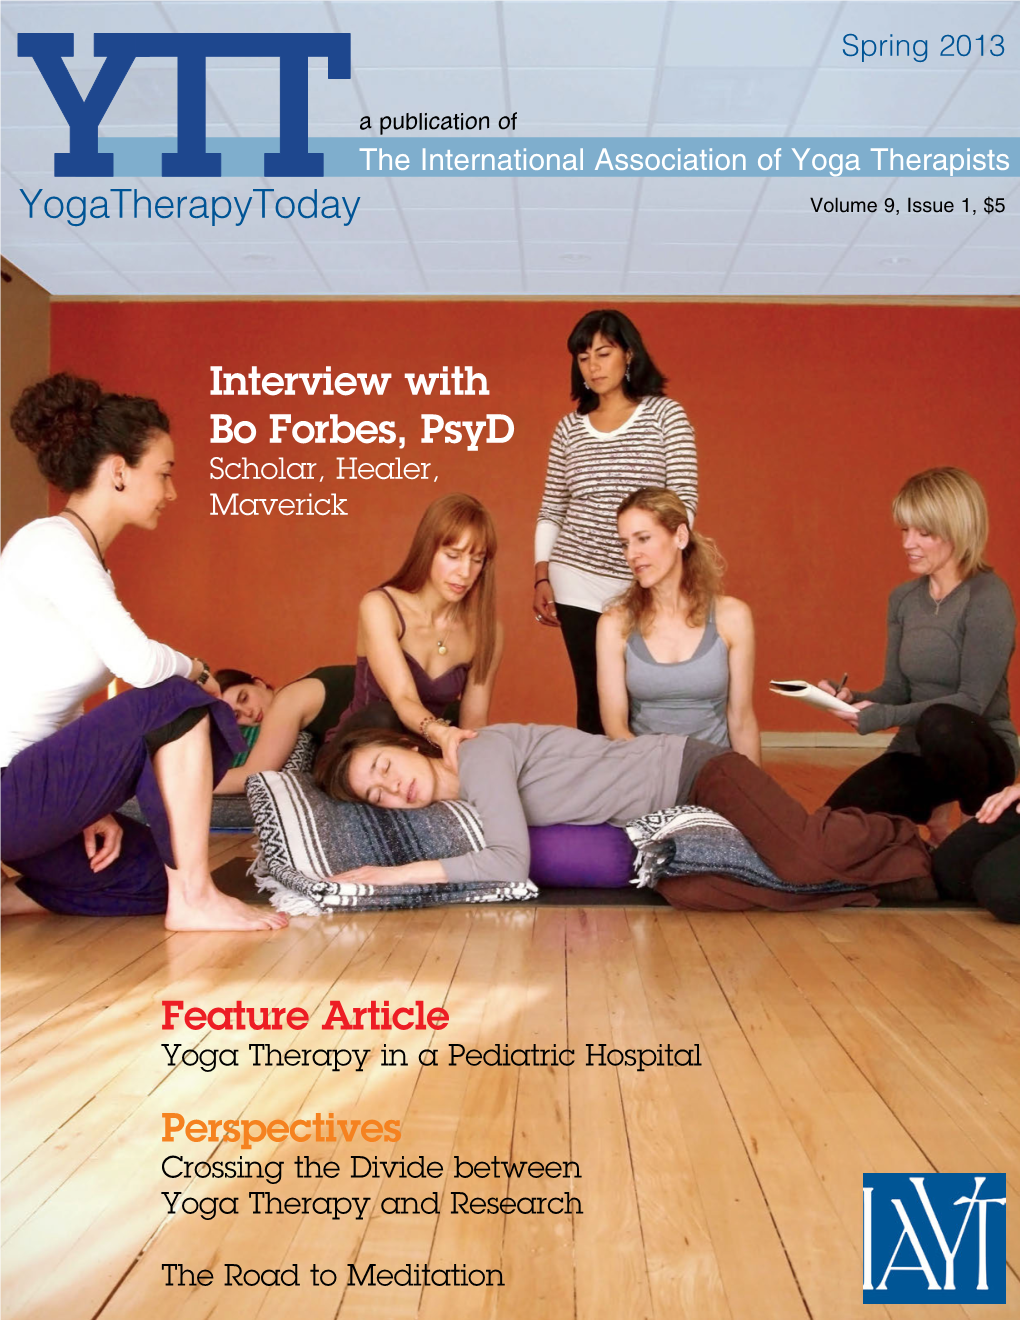 Yogatherapytoday Interview with Bo Forbes, Psyd Feature Article Perspectives